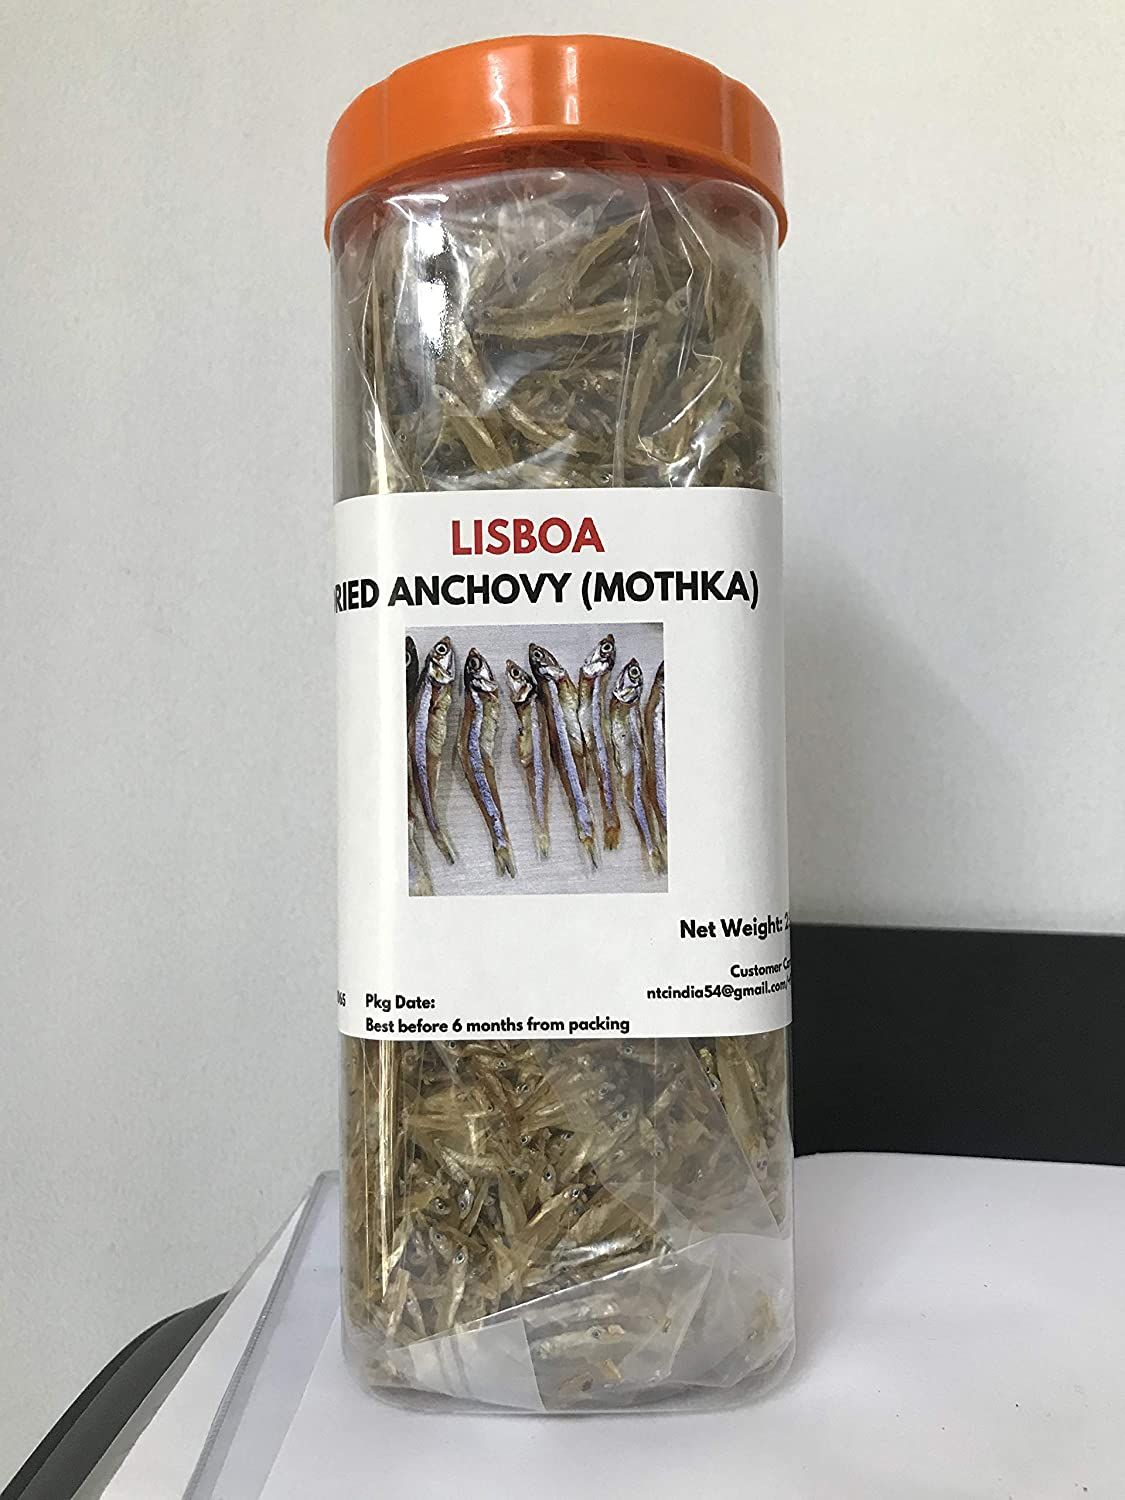 Lisboa Dry Anchovy Small Size Image